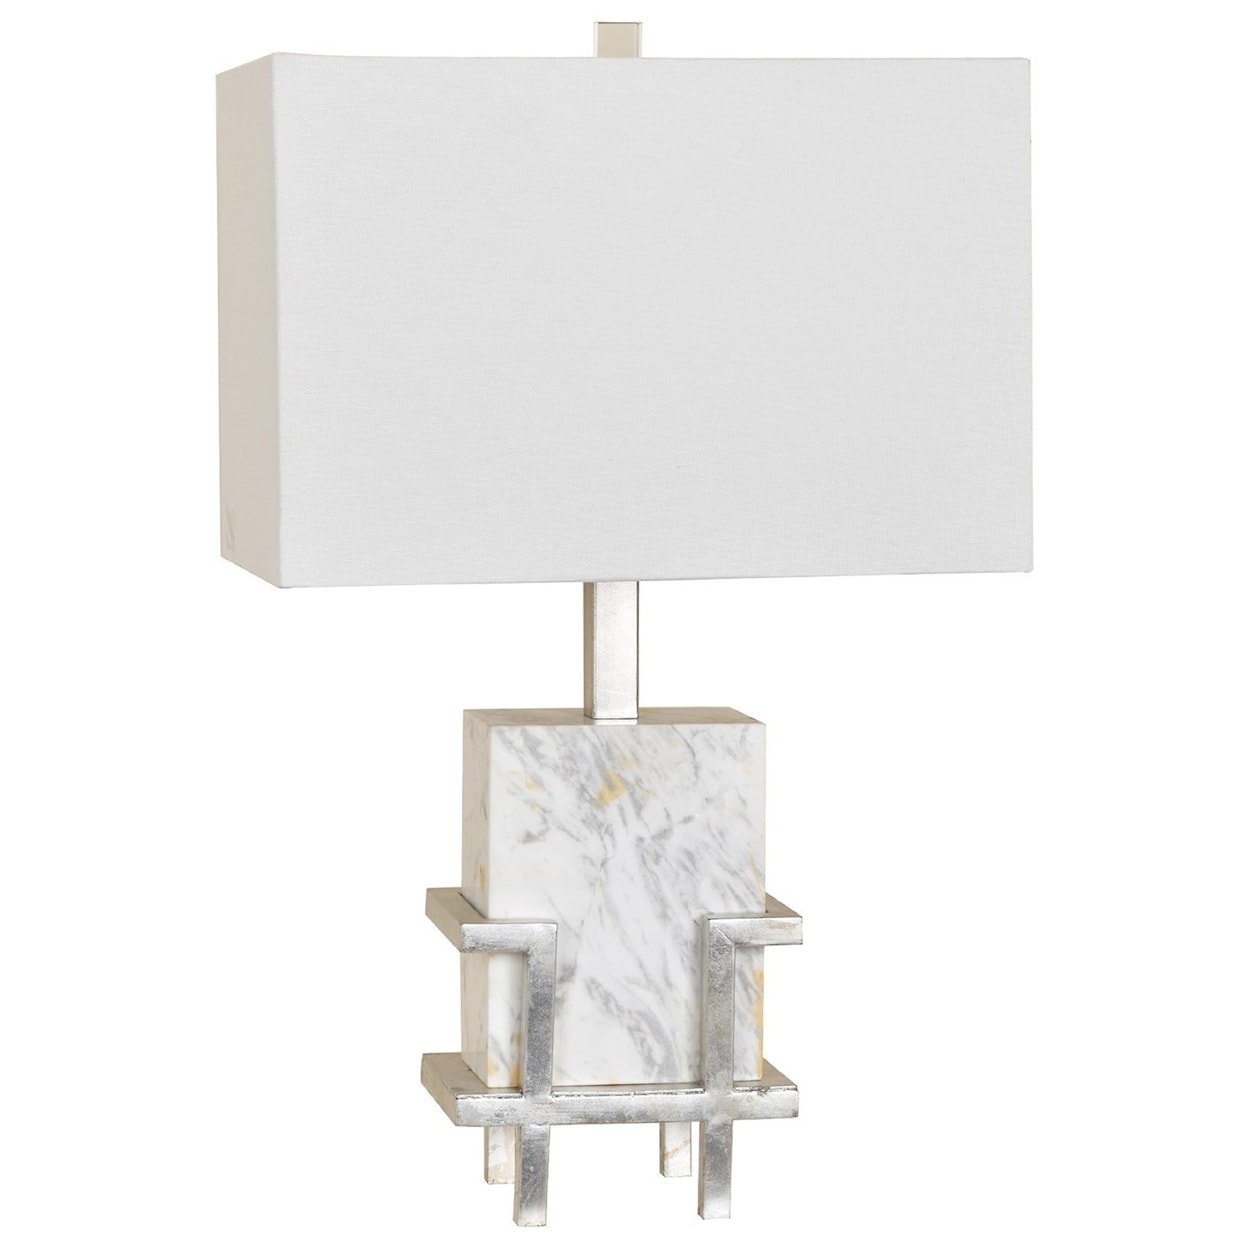 Crestview Collection Lighting Dumont Table Lamp